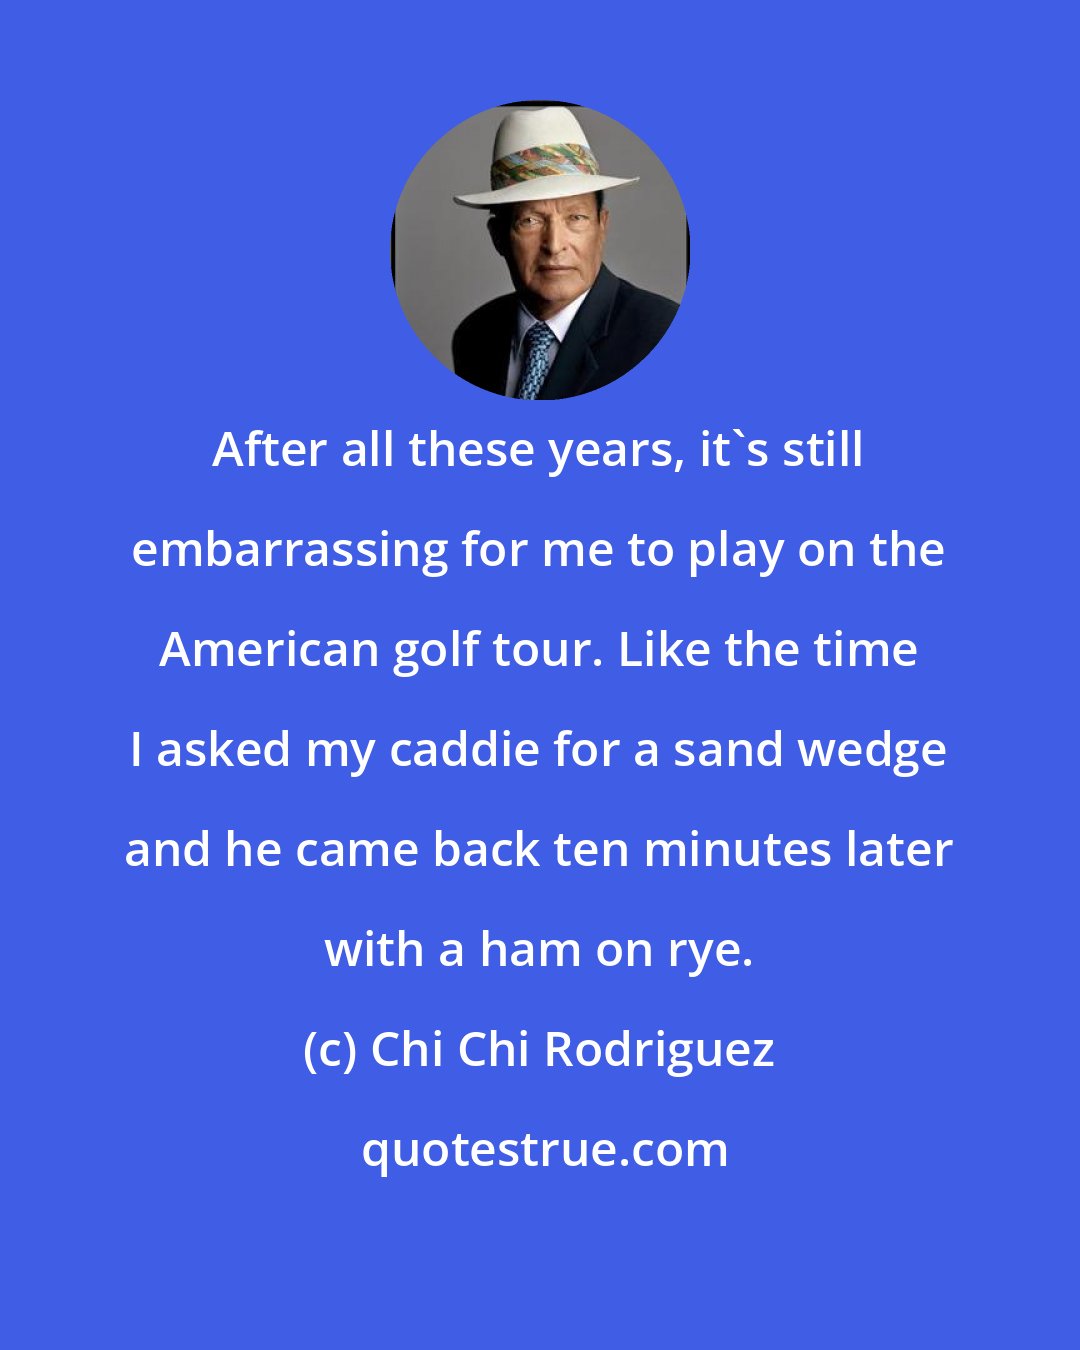 Chi Chi Rodriguez: After all these years, it's still embarrassing for me to play on the American golf tour. Like the time I asked my caddie for a sand wedge and he came back ten minutes later with a ham on rye.